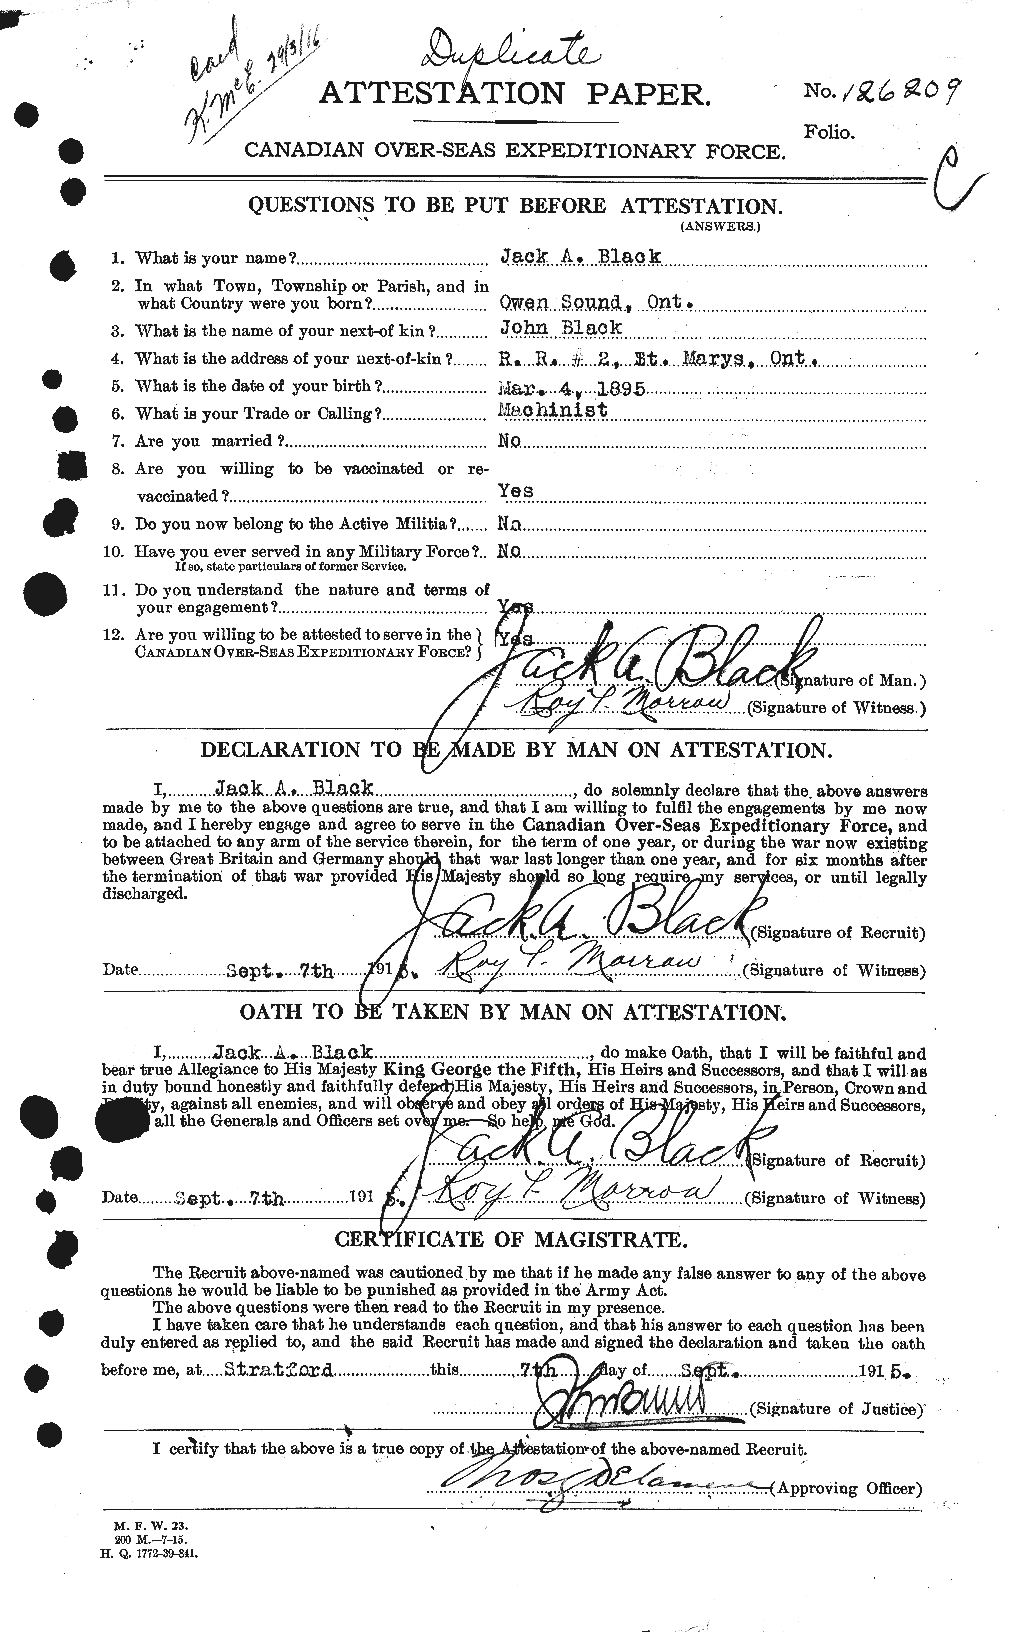 Personnel Records of the First World War - CEF 246818a